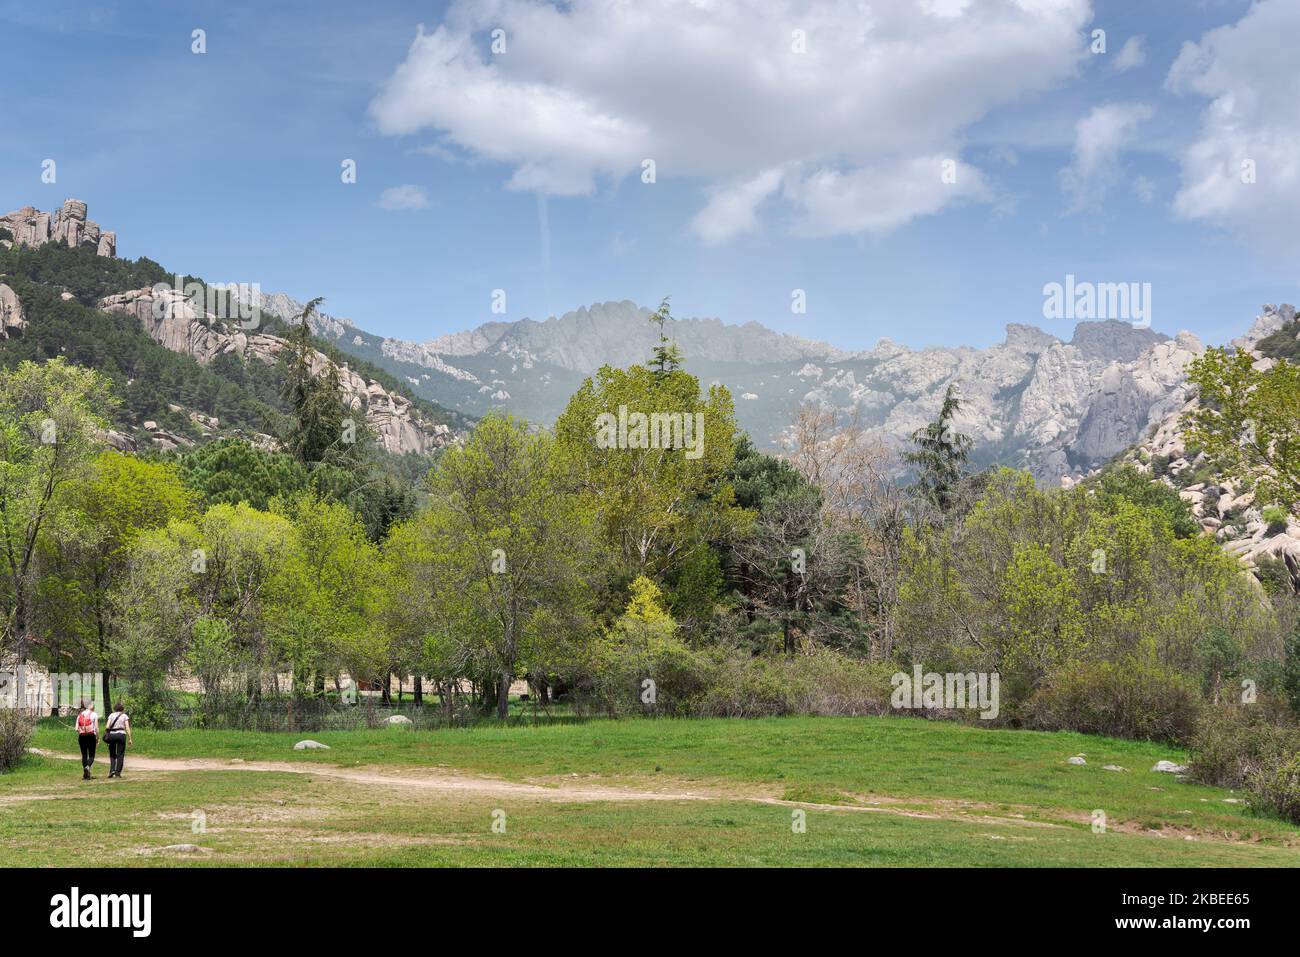 Views of La Pedriza from the recreational area of Cantocochino, Guadarrama Mountains National Park, Madrid, Spain Stock Photo